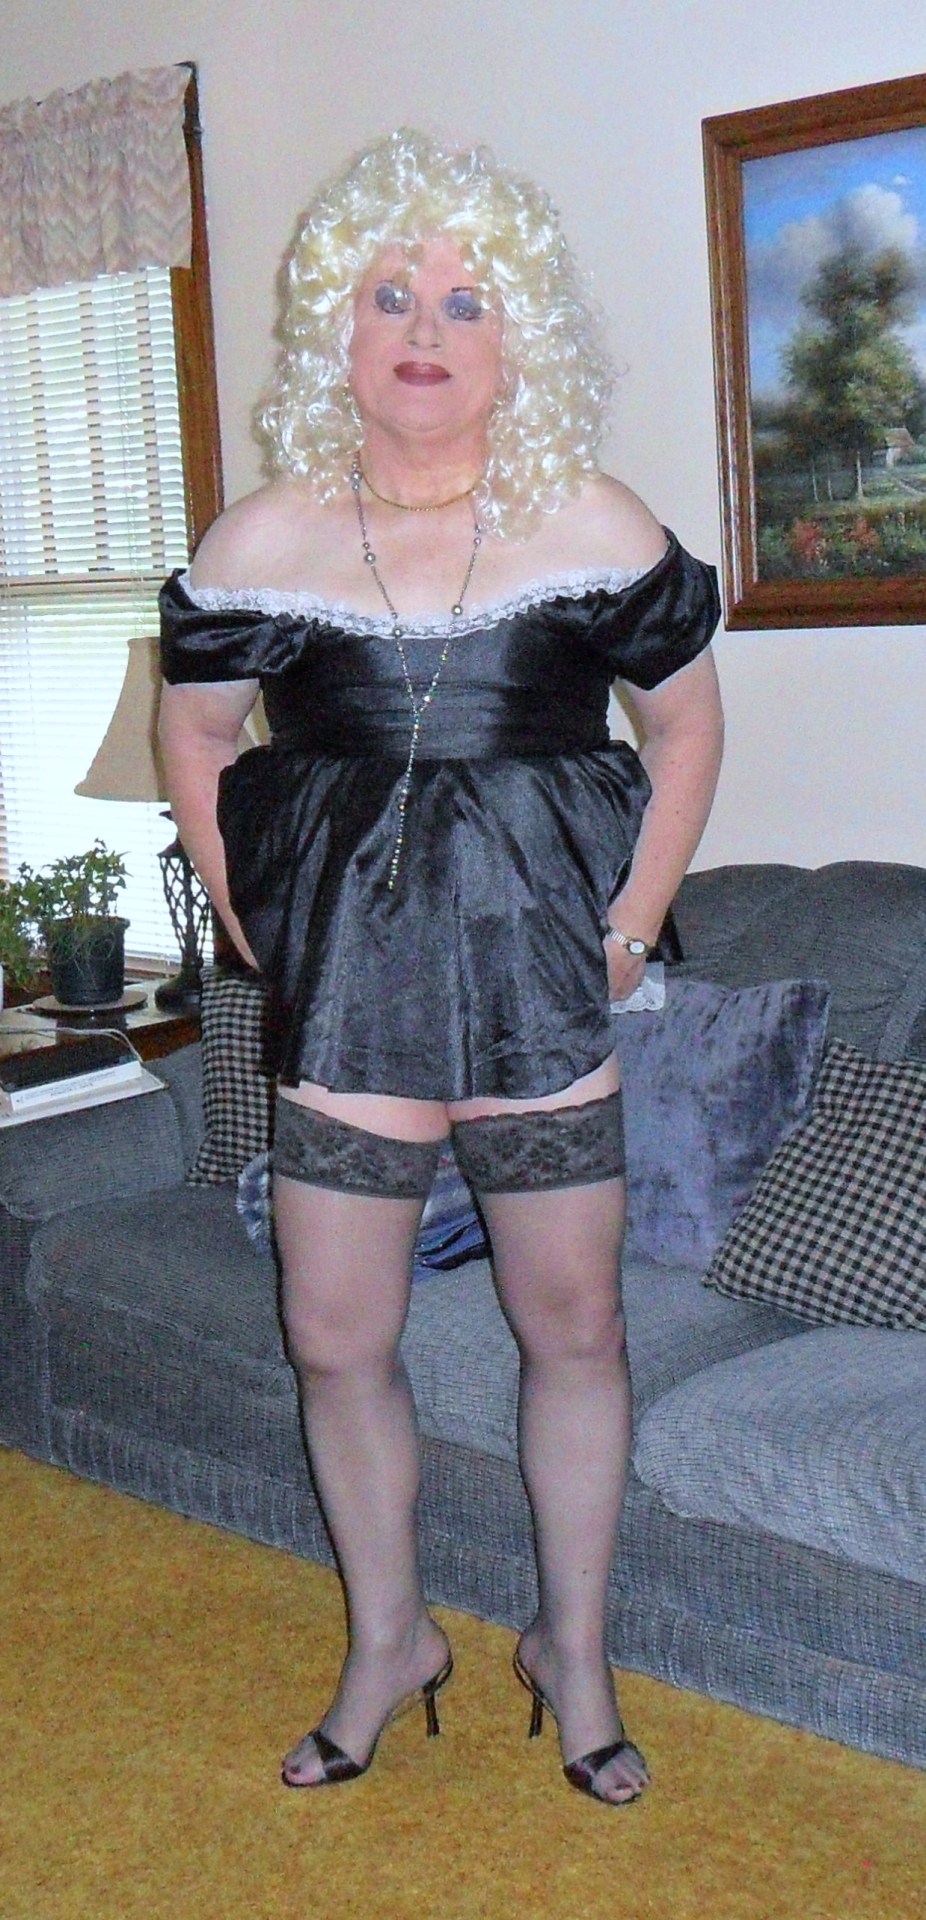 ddkellysdaringdisguise:Still a maid in my dreams….in heels and in stocking feet….a